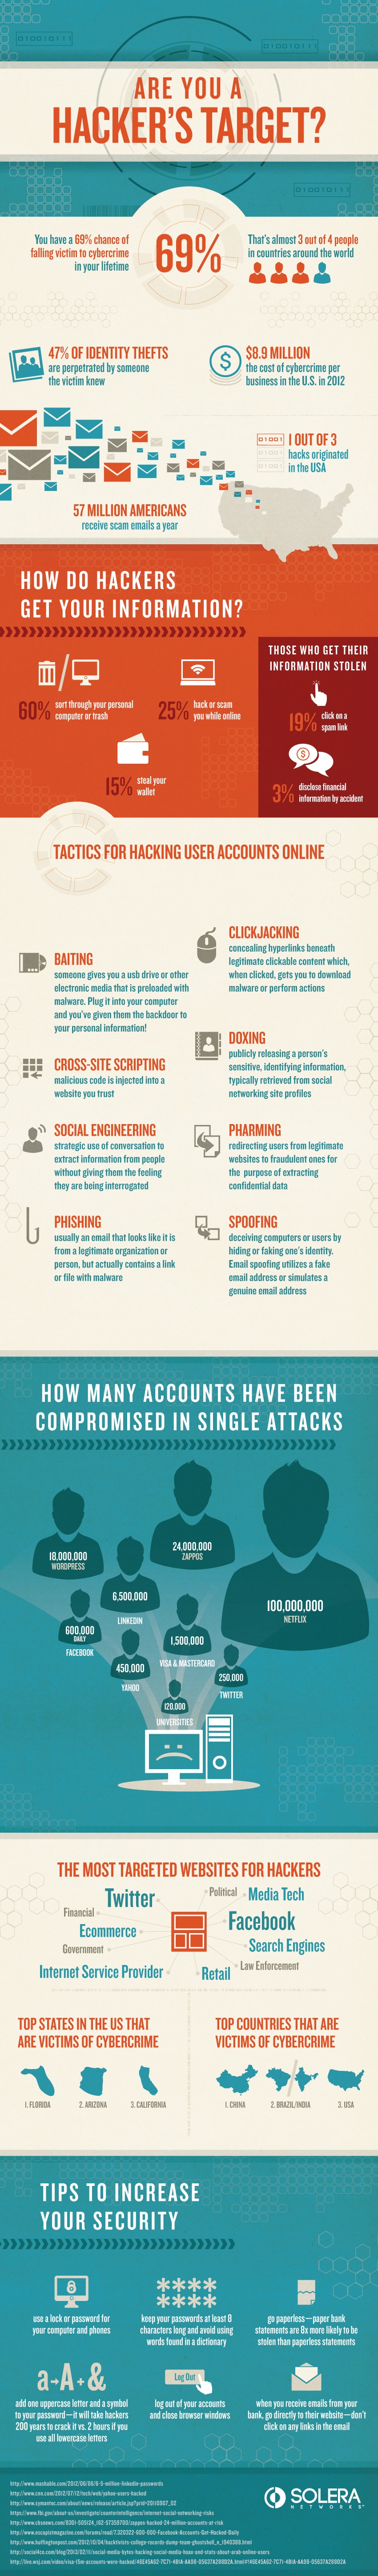 Are You An Easy Hacker Target? [Infographic]